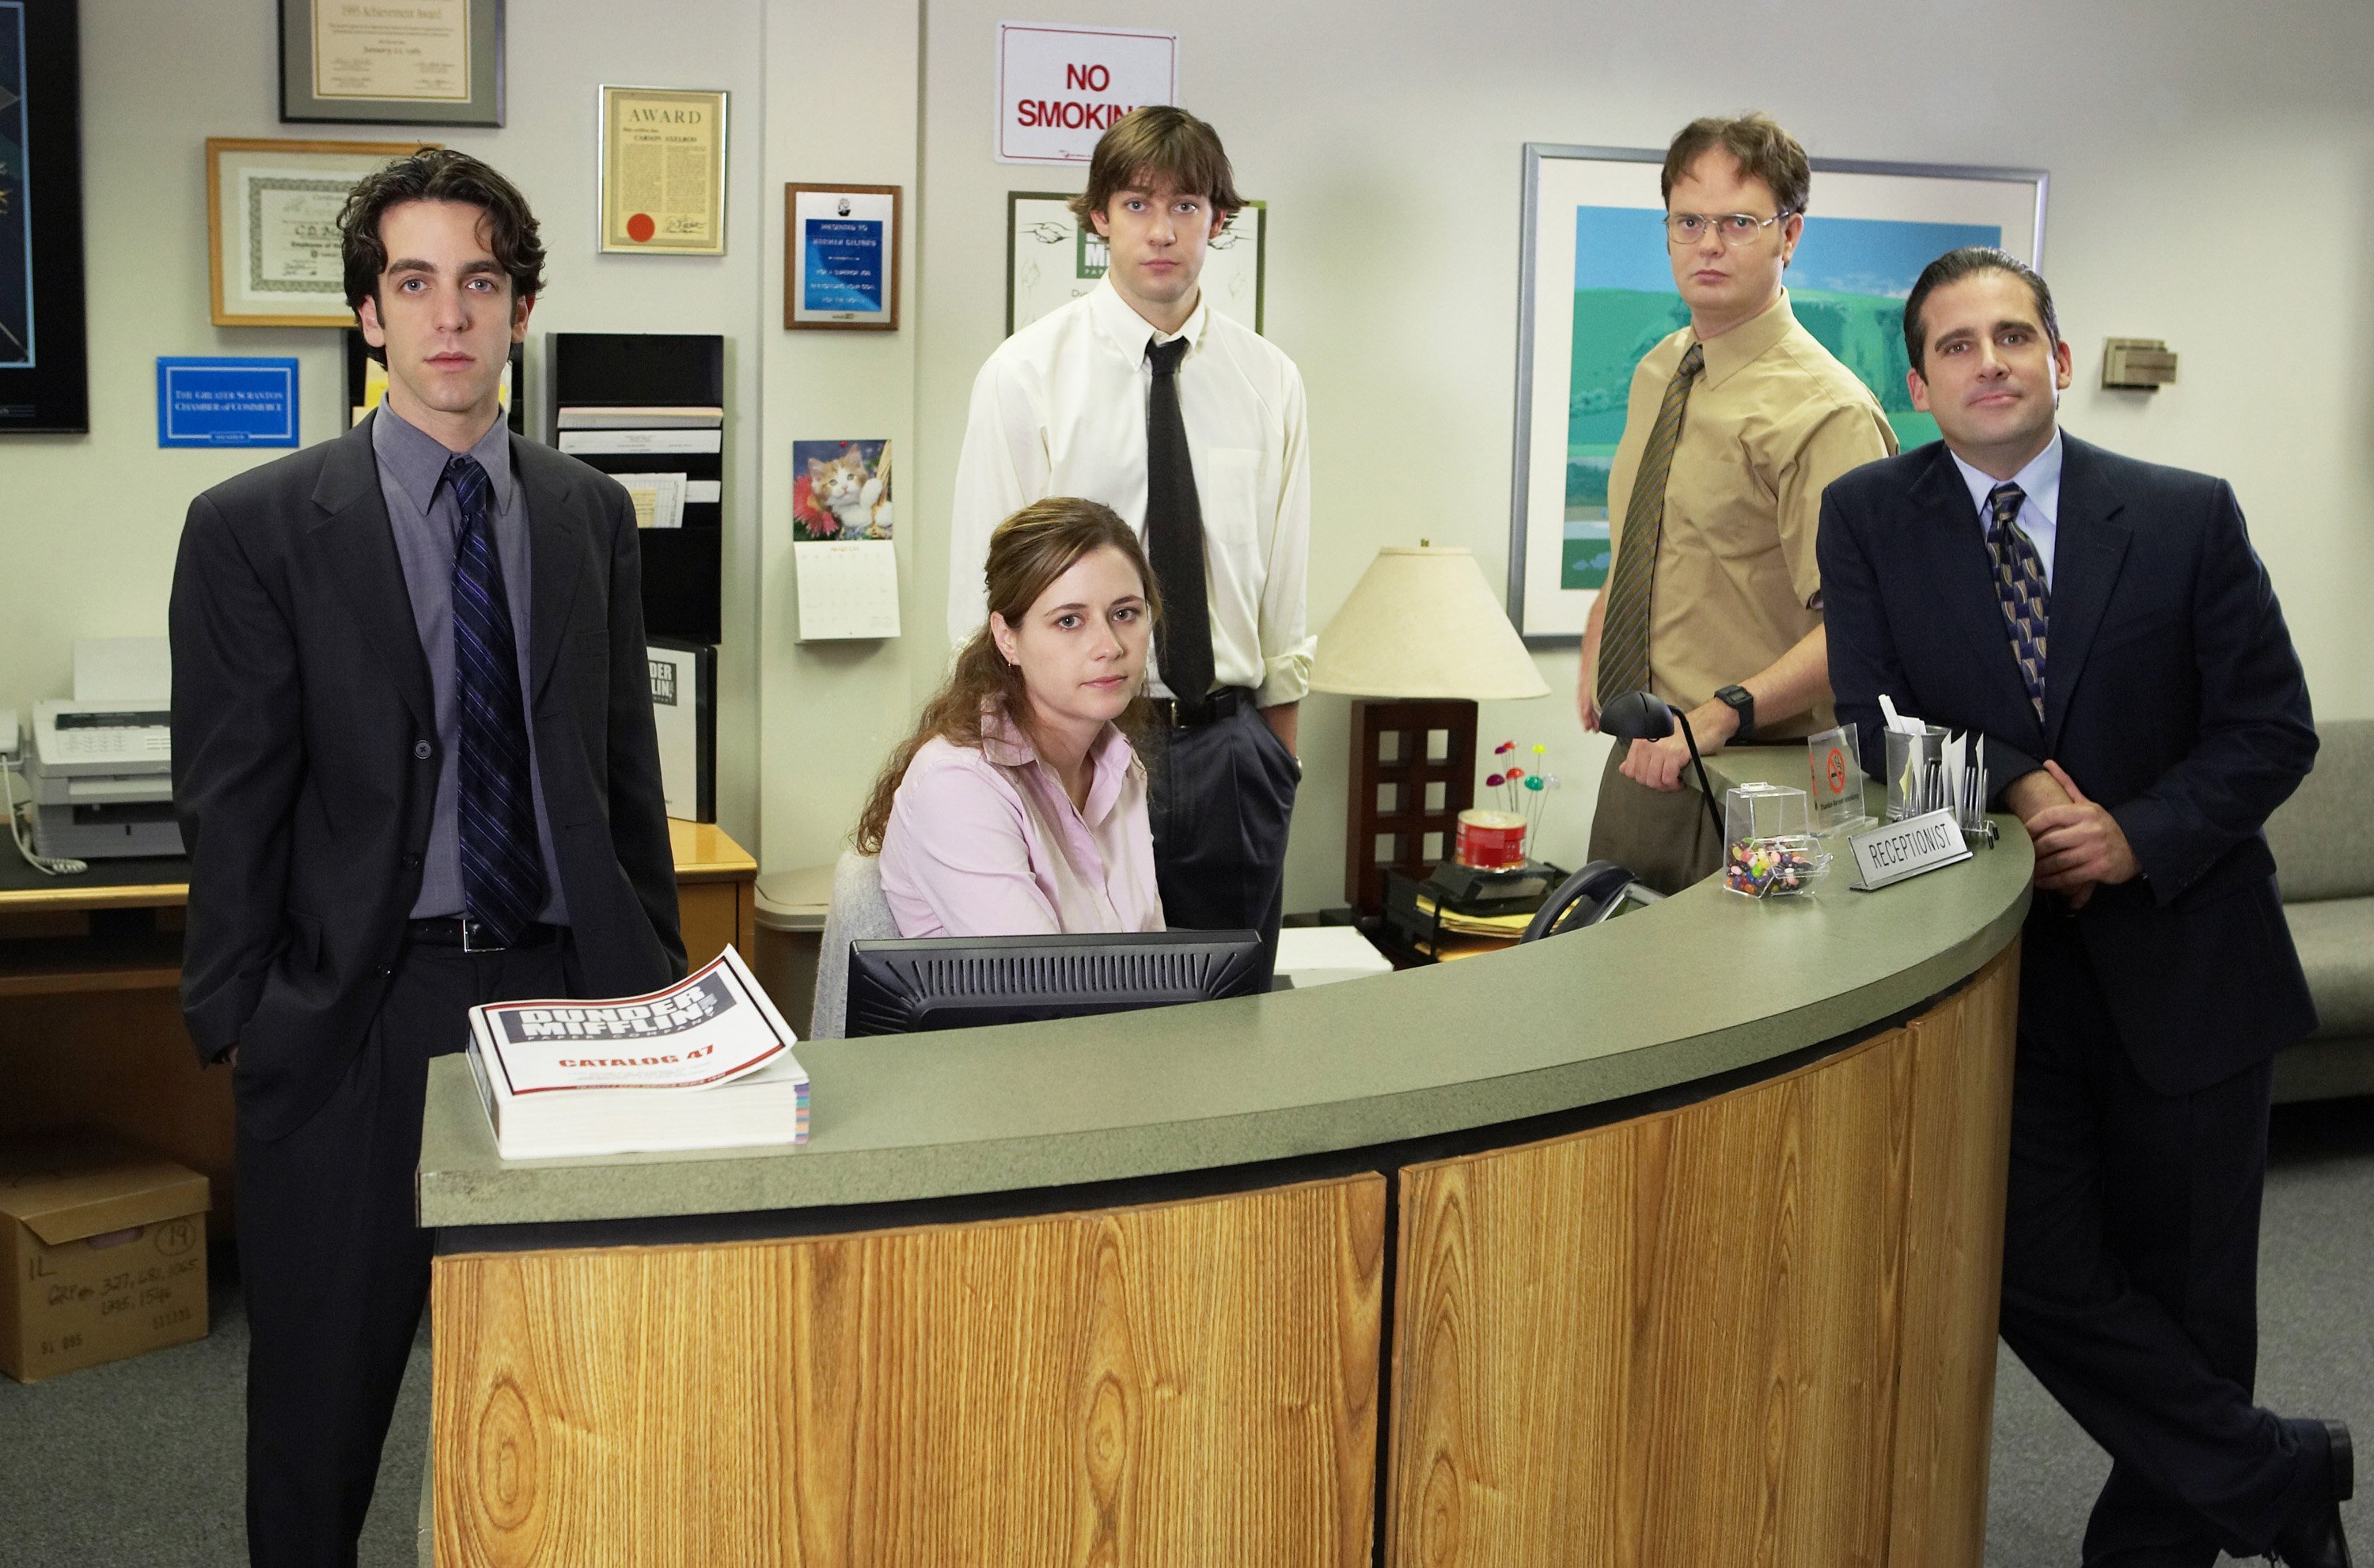 Ryan, Jim, Dwight, Michael, and Pam from 'The Office' stare blankly at the camera.